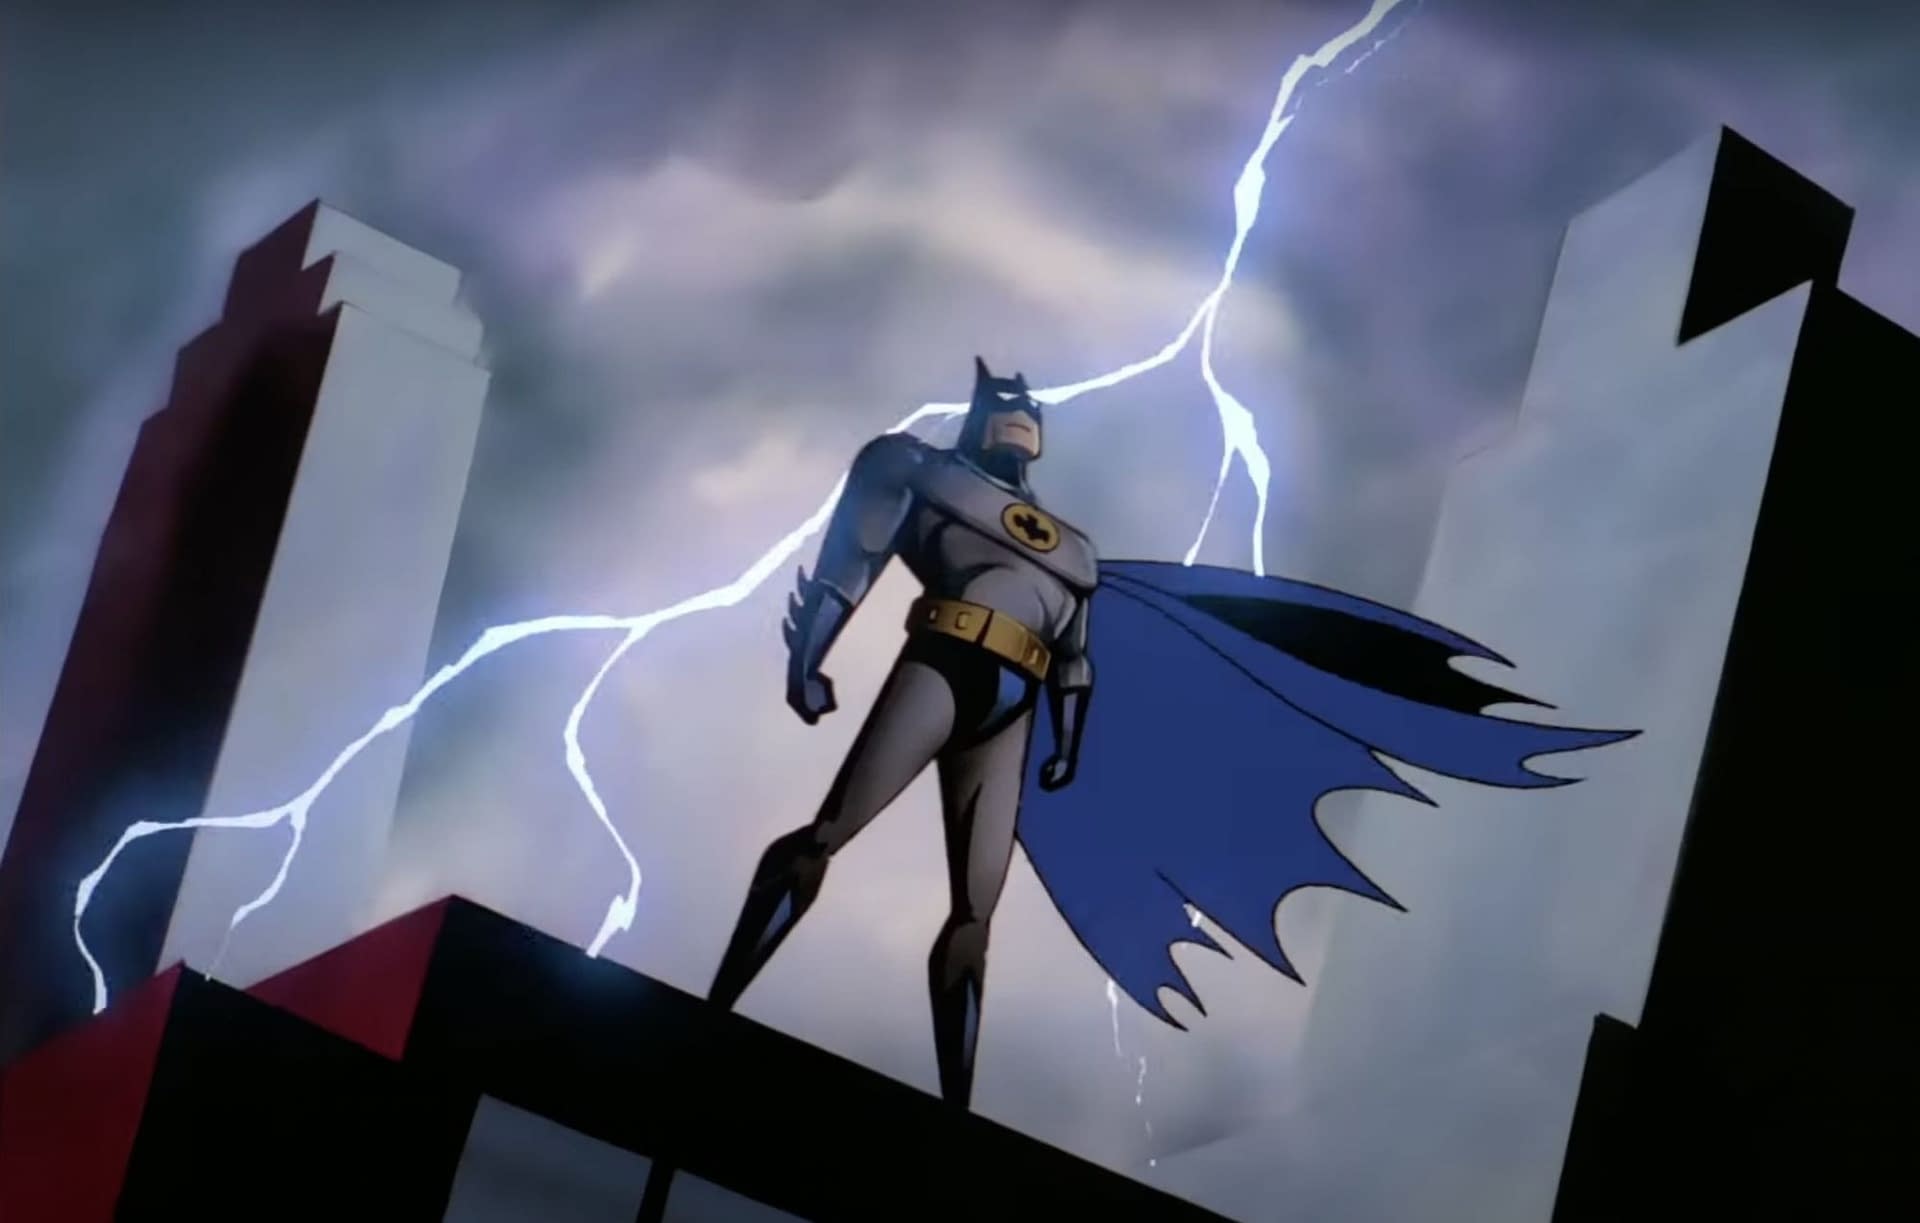 Batman: The Animated Series at 30: The Show That Redefined Animation